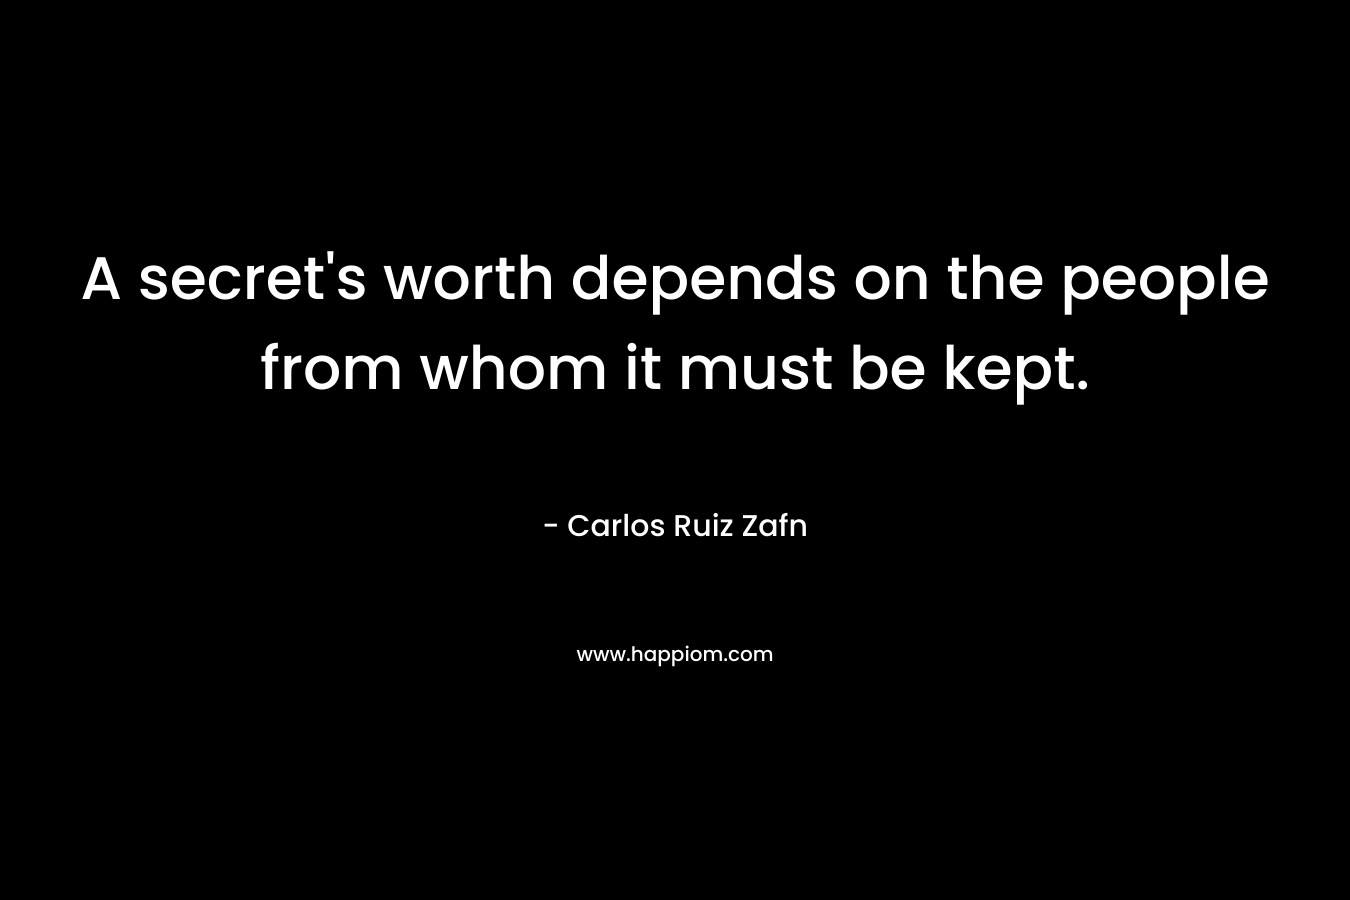 A secret's worth depends on the people from whom it must be kept.